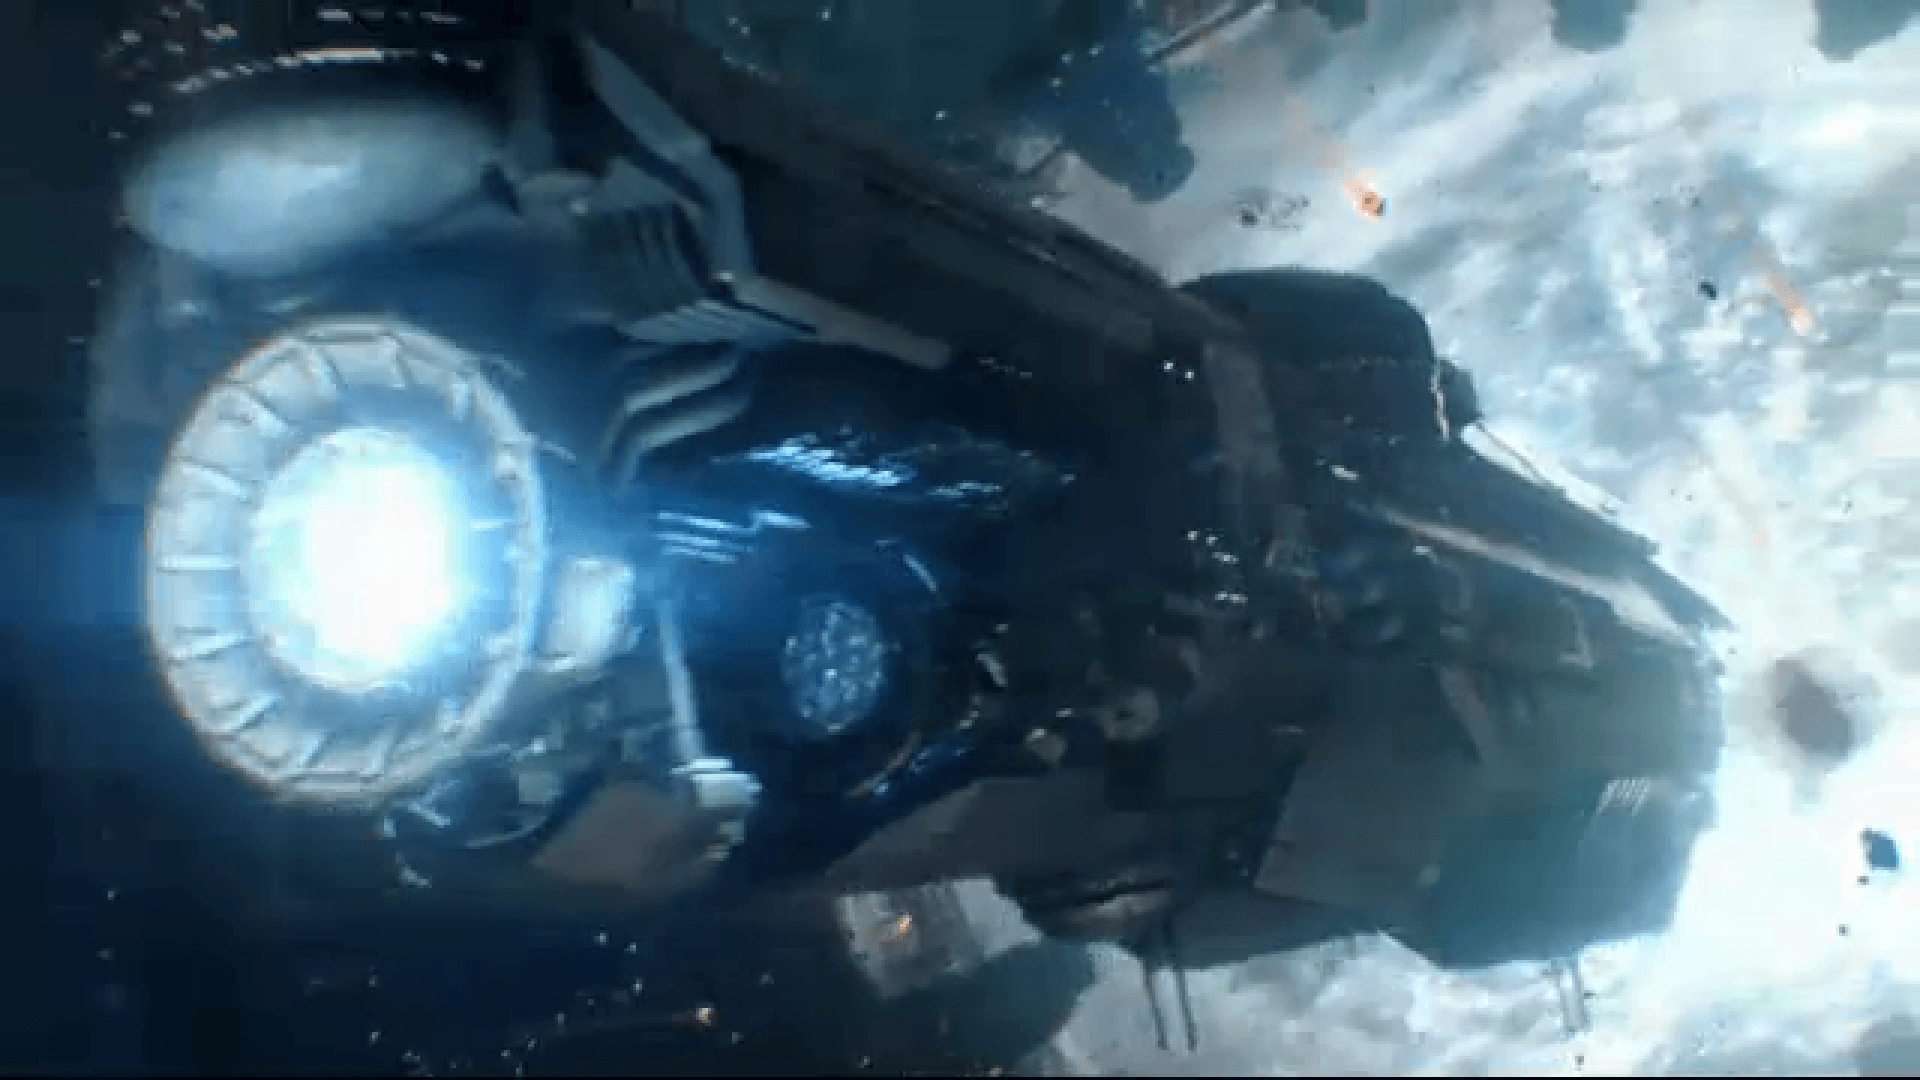 E3 Halo 4 trailer discussion and screenshots of live action